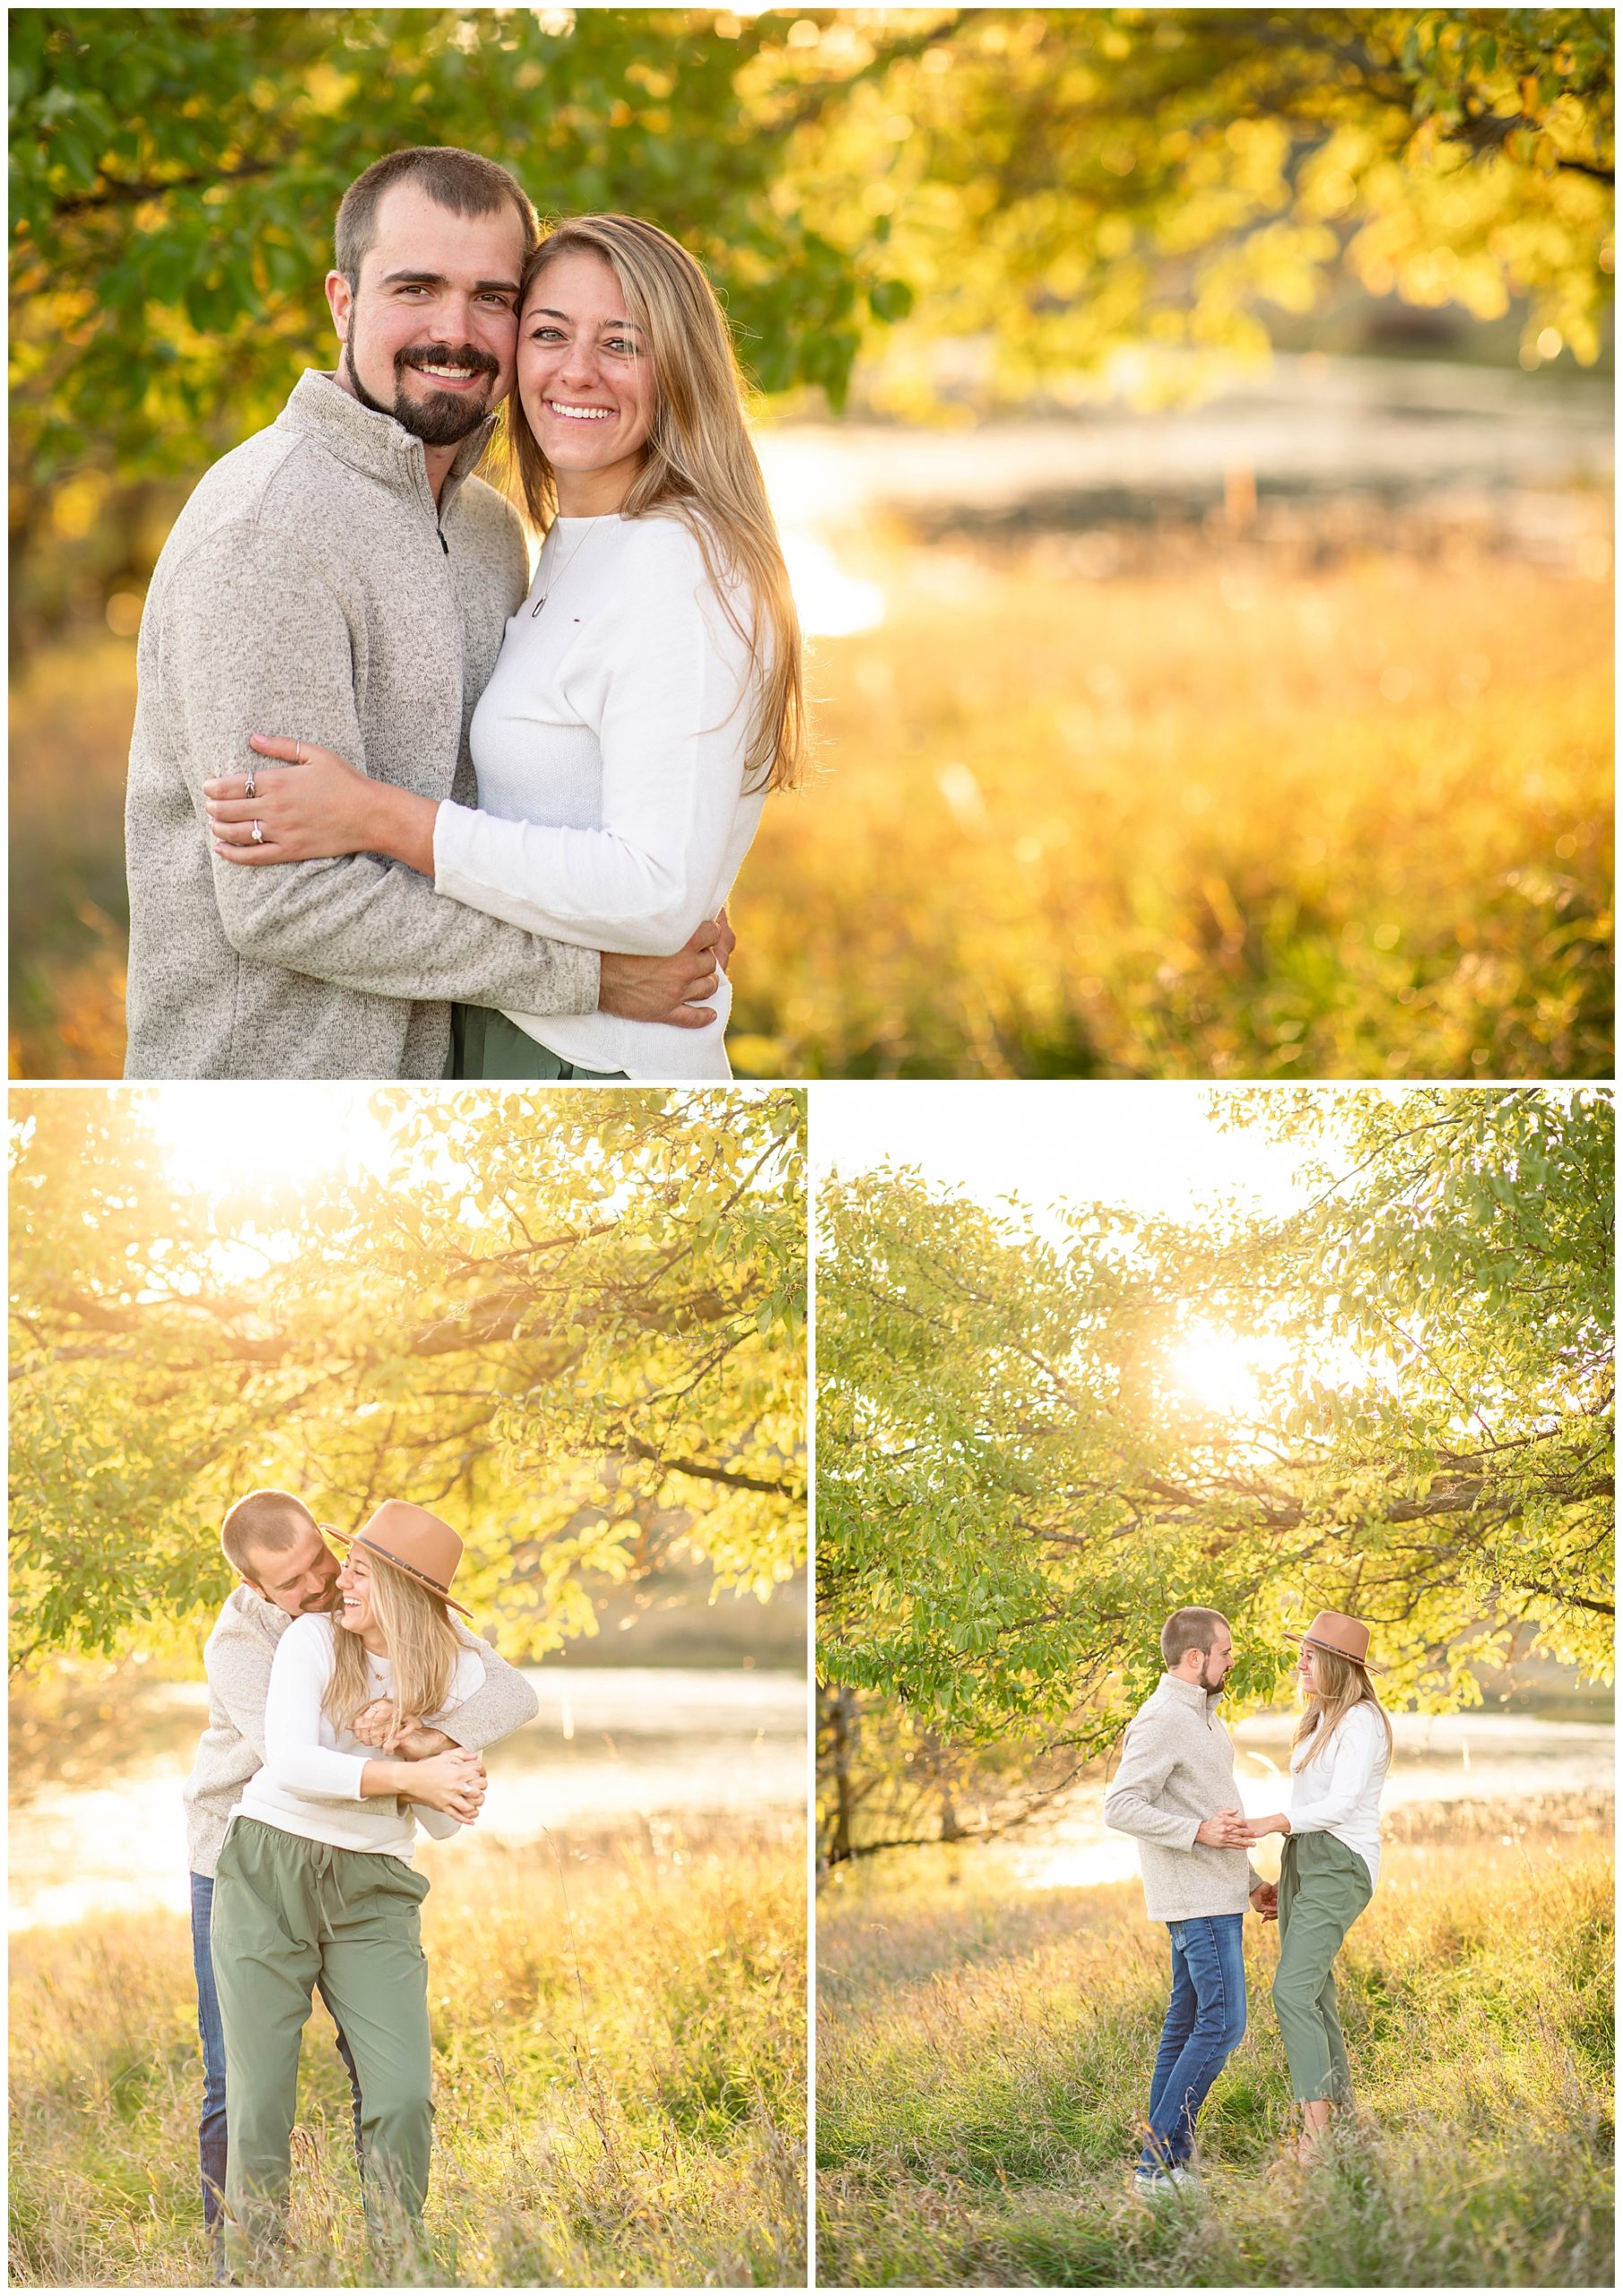 What to wear to your fall engagement session